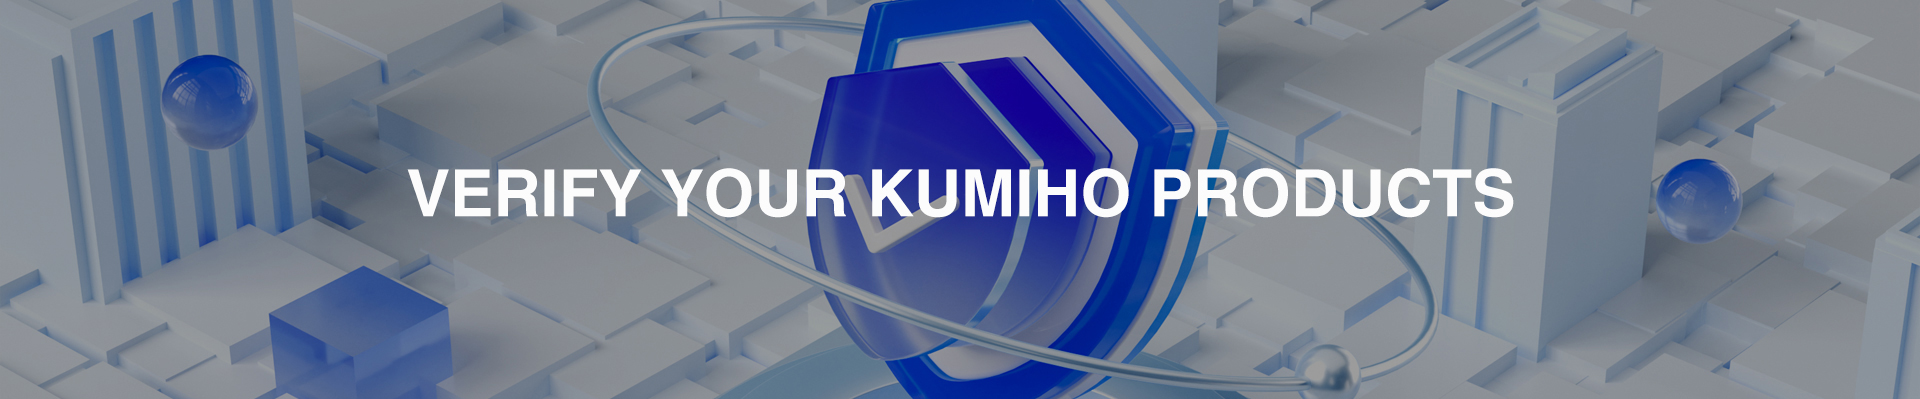 Verify Your KUMIHO Products